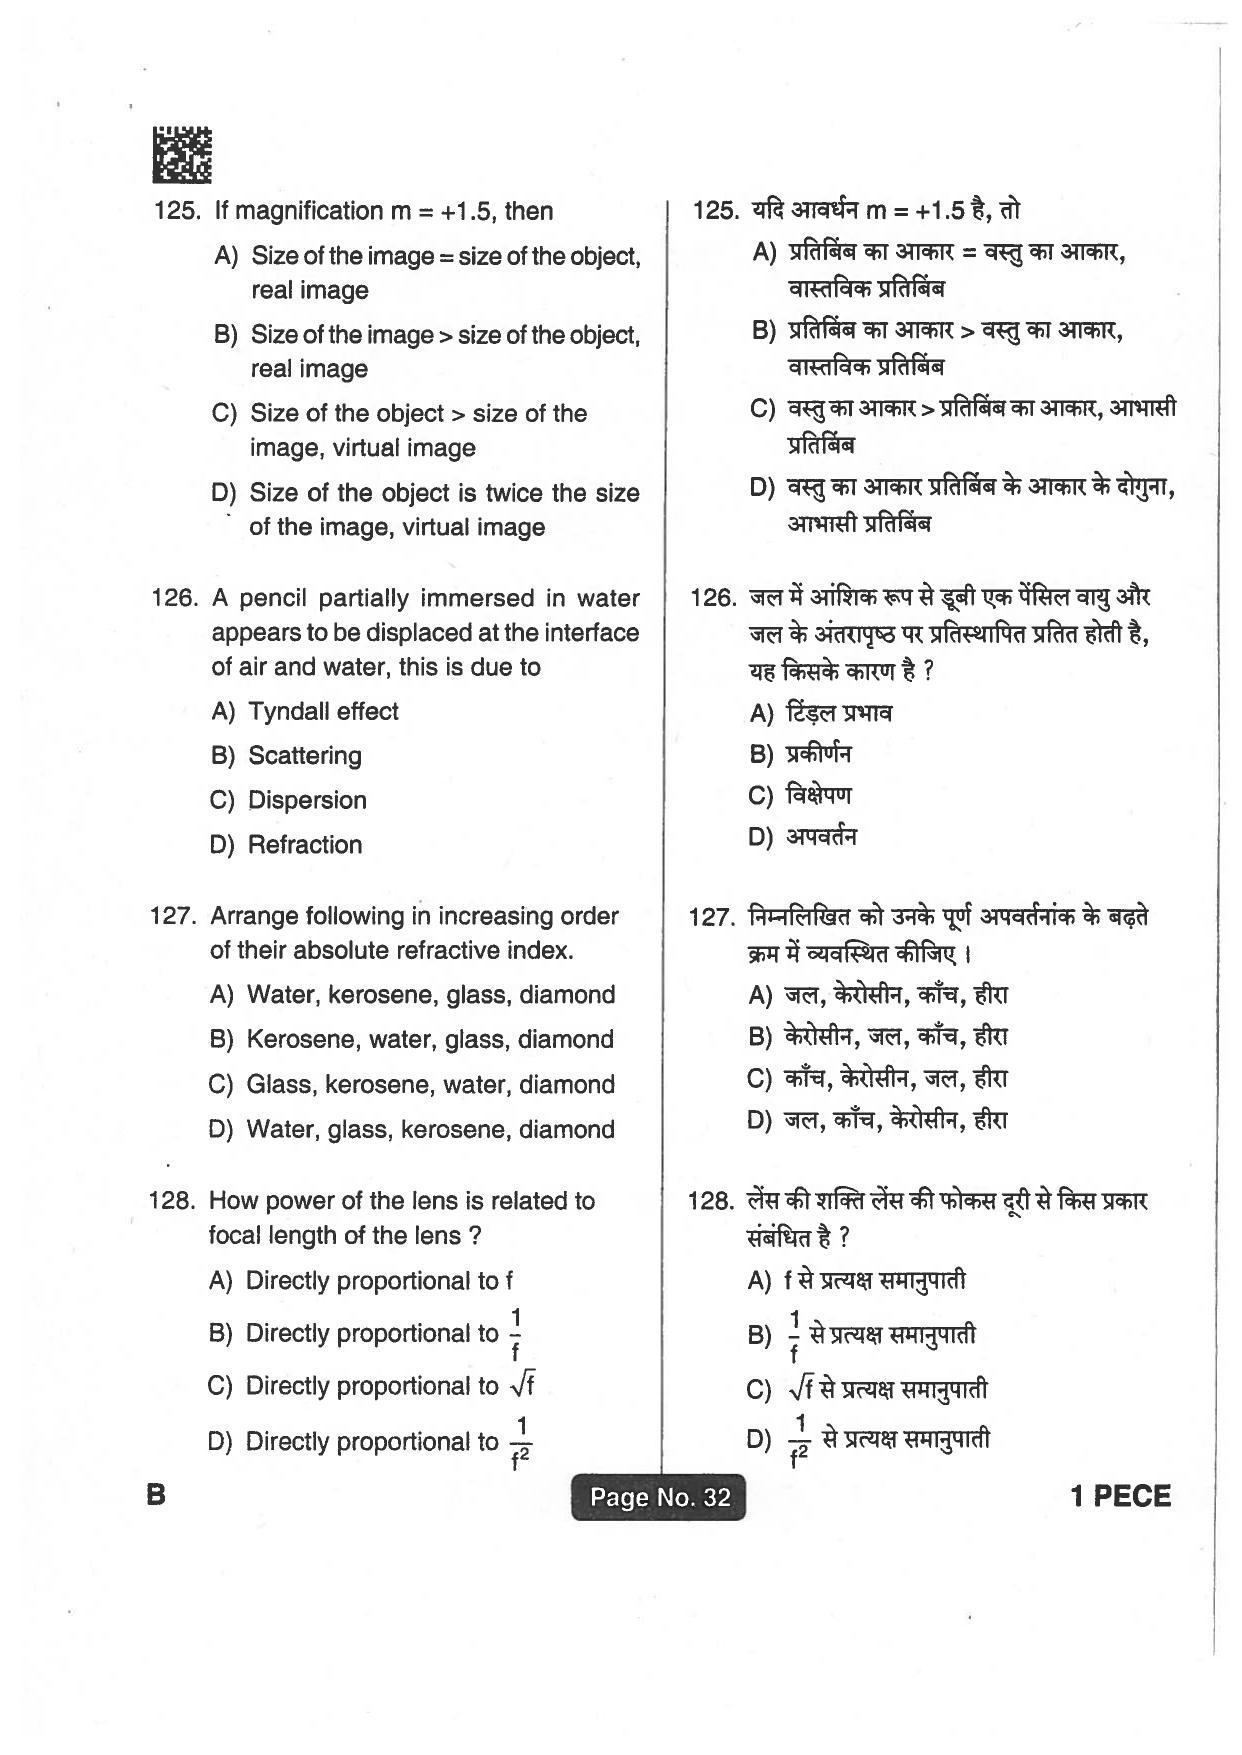 Jharkhand Polytechnic SET B 2018 Question Paper with Answers - Page 31